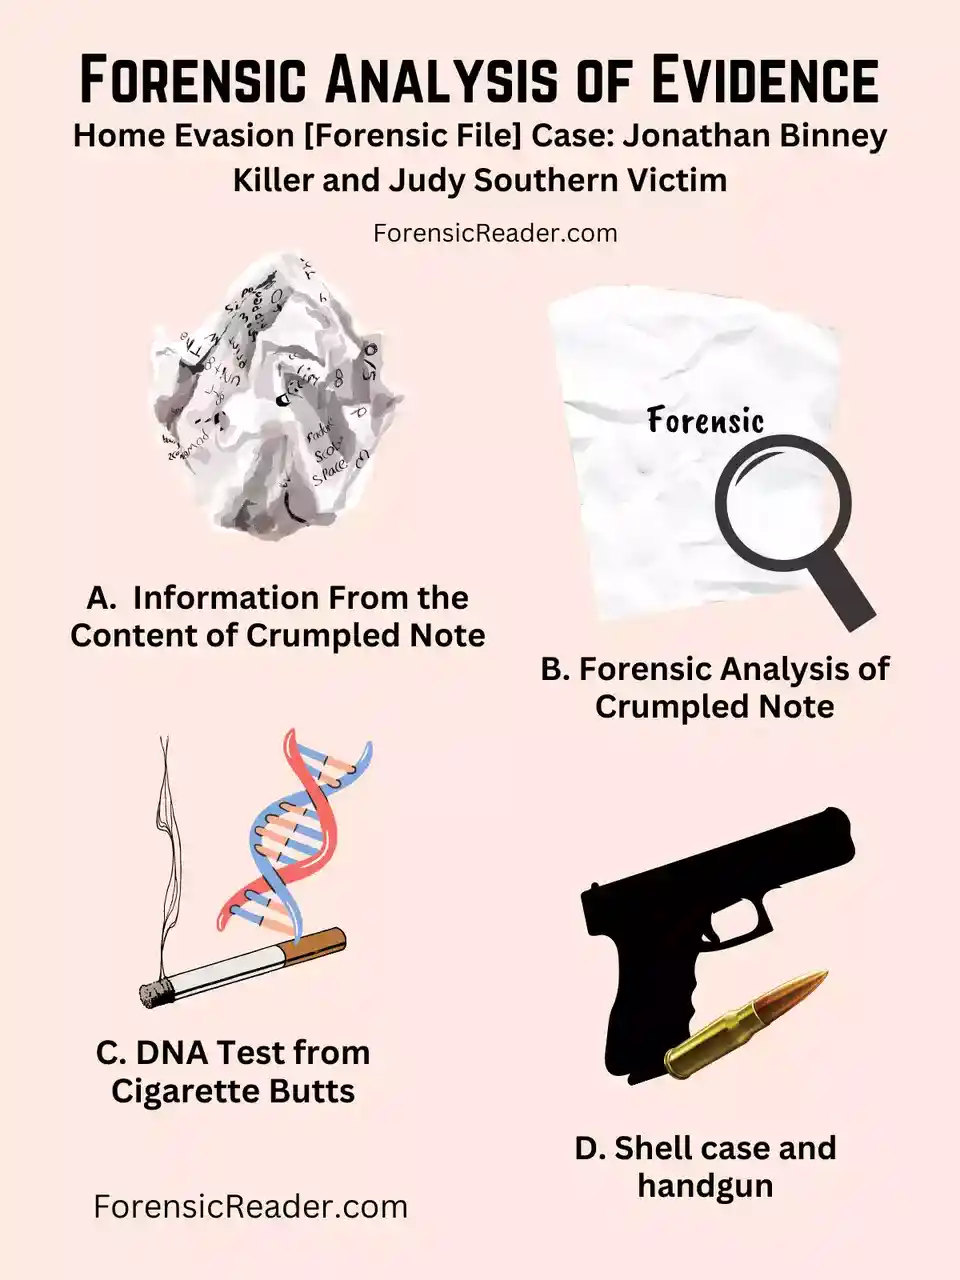 Forensic Analysis of The Evidence in Home Evasion Forensic File Case against Jonathan Binney Killer and Judy Southern Victim